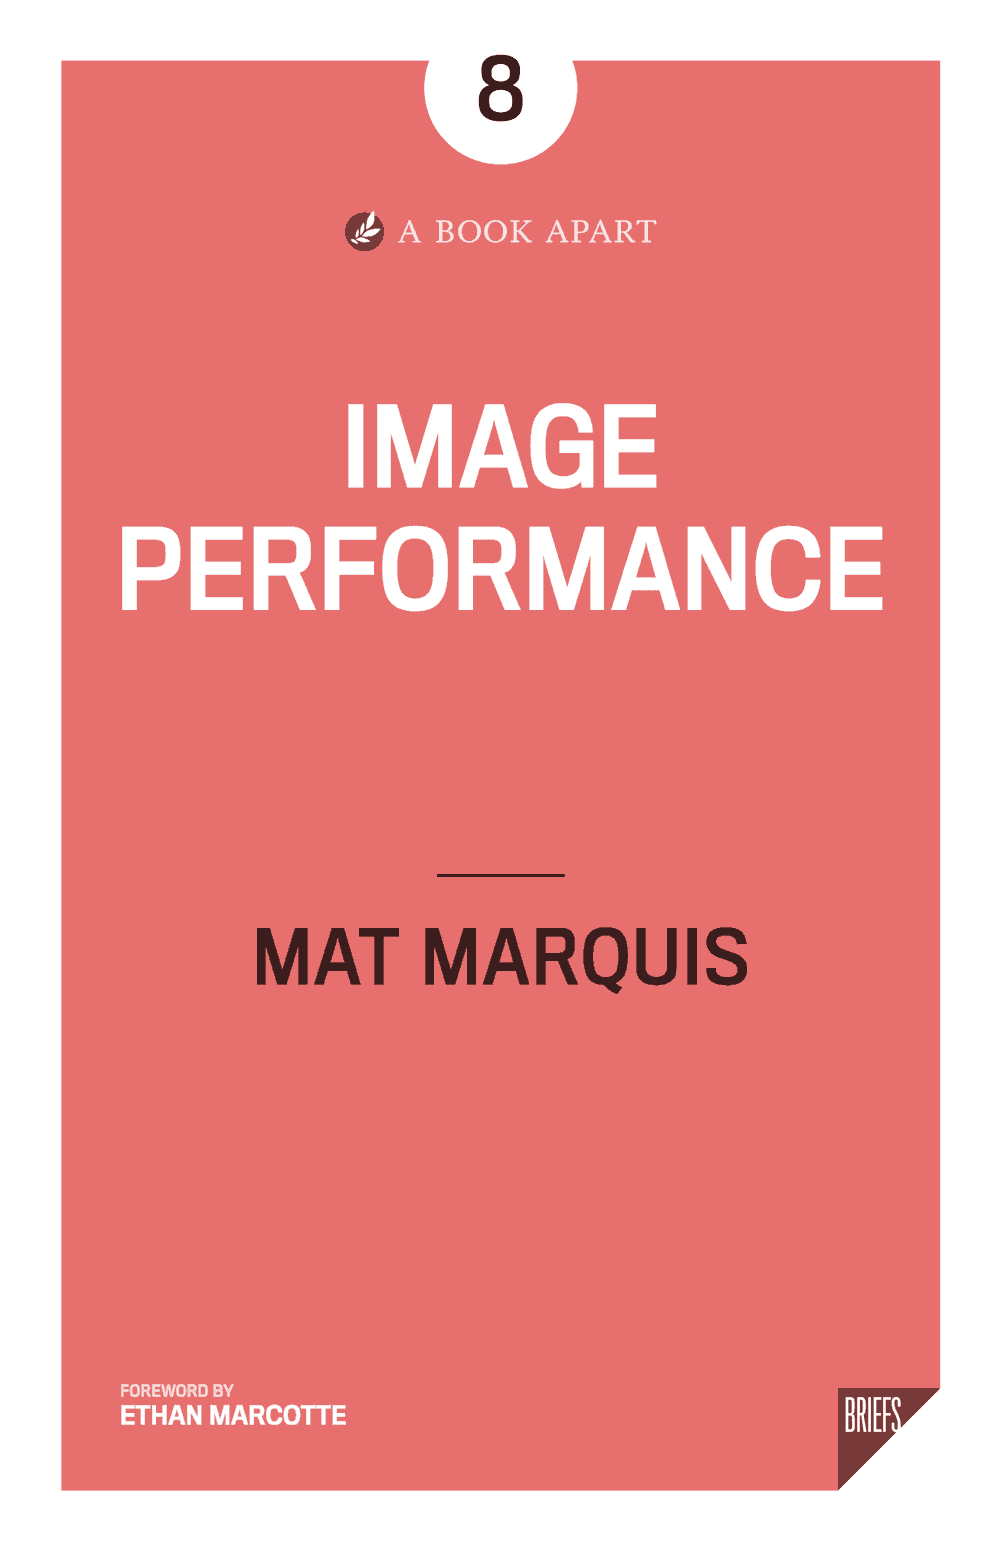 Cover of Image Performance, published by A Book Apart, written by Mat Marquis, foreword by Ethan Marcotte.